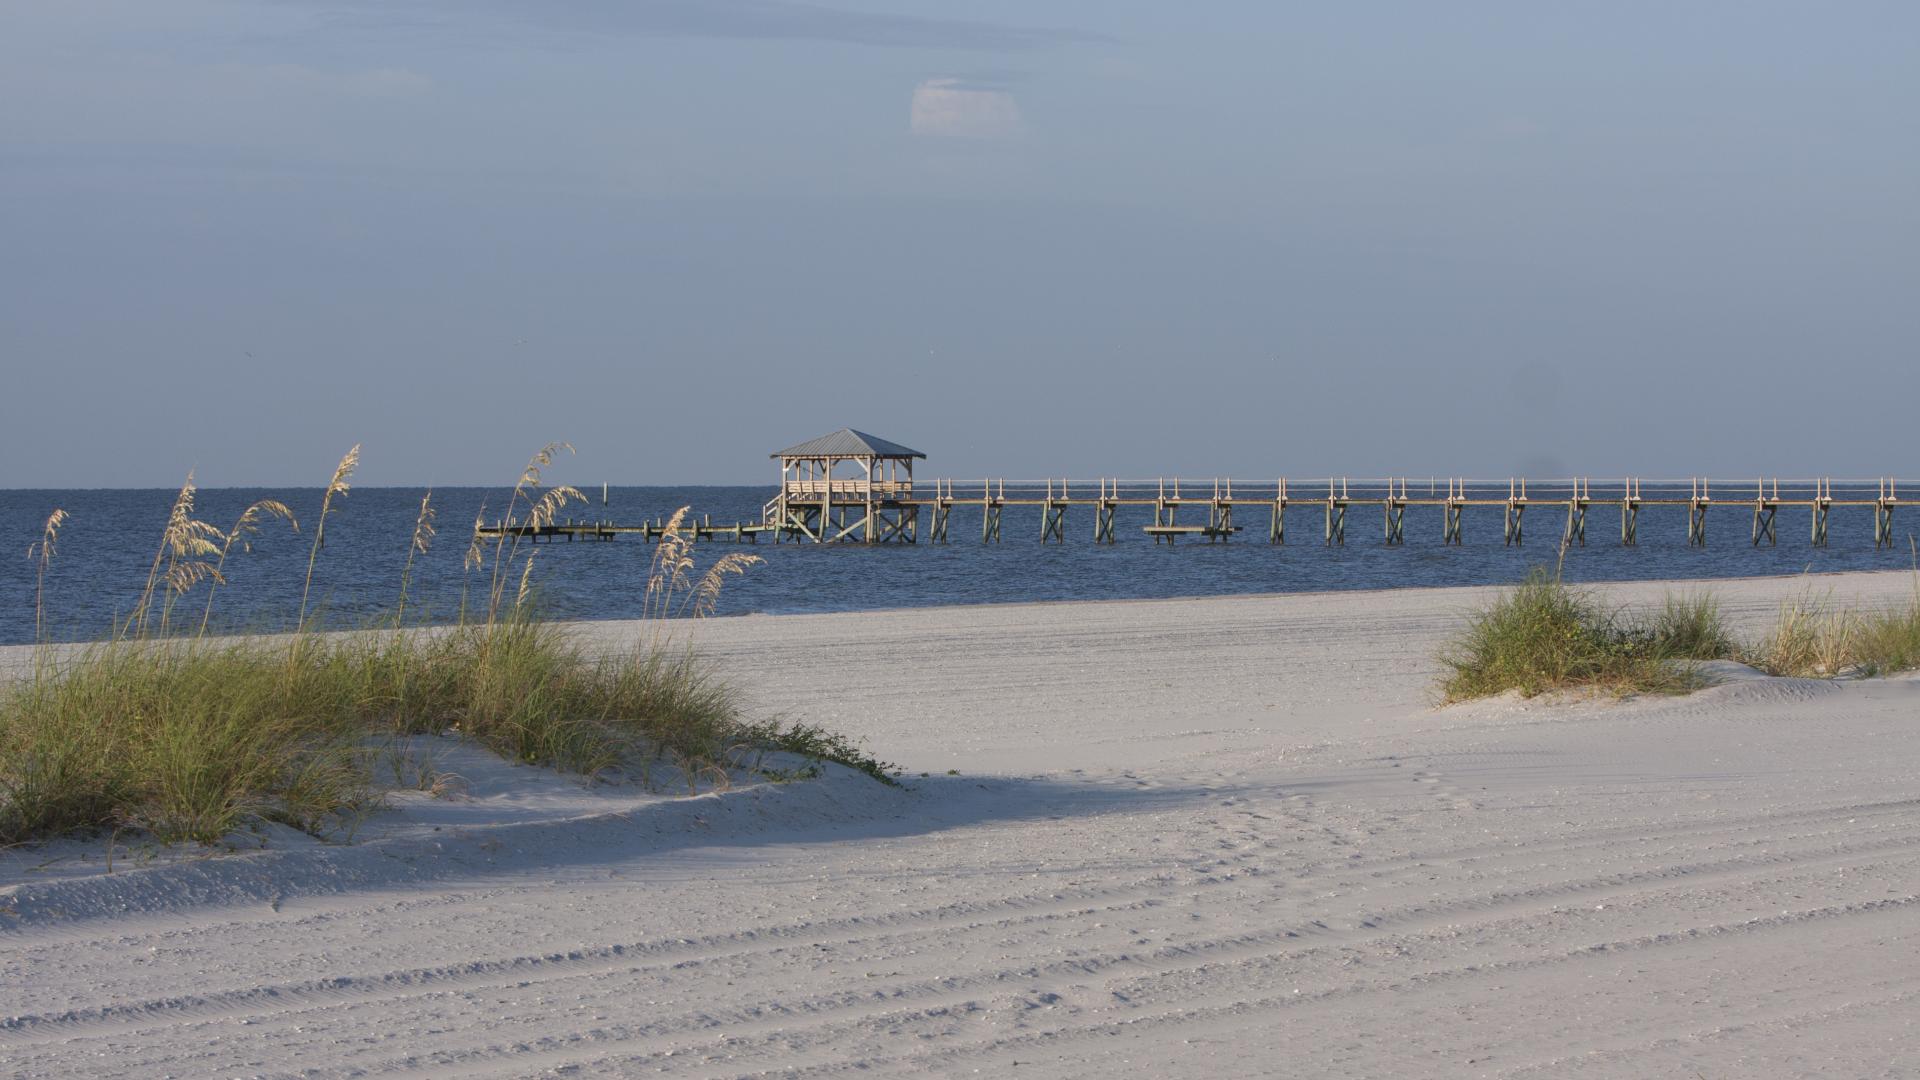 Mississippi Gulf Coast, beach view looking out at dock in the water